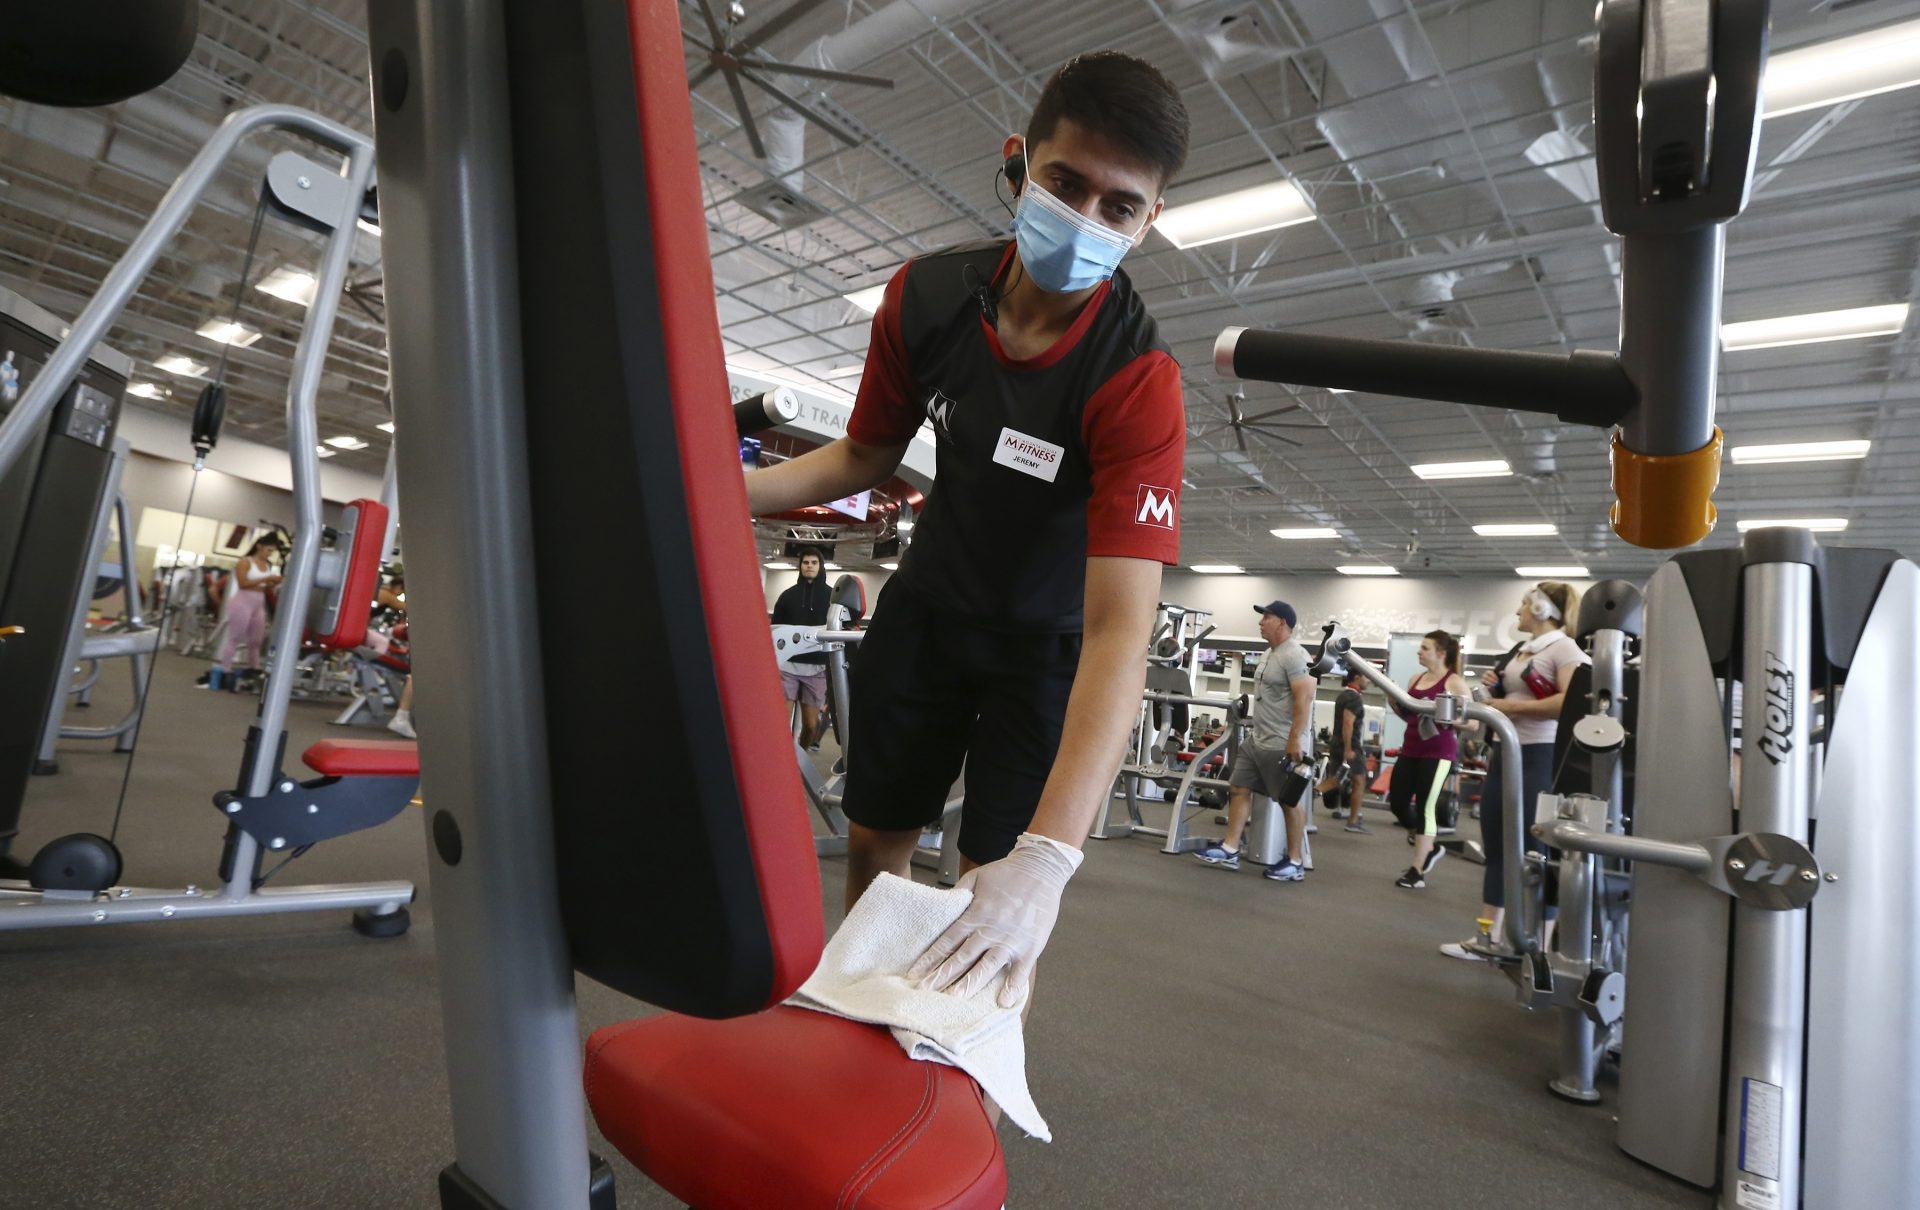 Jeremy Zepeda, a front desk associate at Mountainside Fitness, disinfects workout equipment as the facility remains open even as Arizona Gov. Doug Ducey has issued an executive order for all gyms to close due to the surge in coronavirus cases in Arizona Thursday, July 2, 2020, in Phoenix. For the third straight day, several health clubs in metro Phoenix were defying Ducey's 30-day shutdown order to close gyms, bars, water park and tubing businesses, raising questions about whether officials who have been criticized for responding indecisively to the pandemic will be effective in shutting down the clubs.